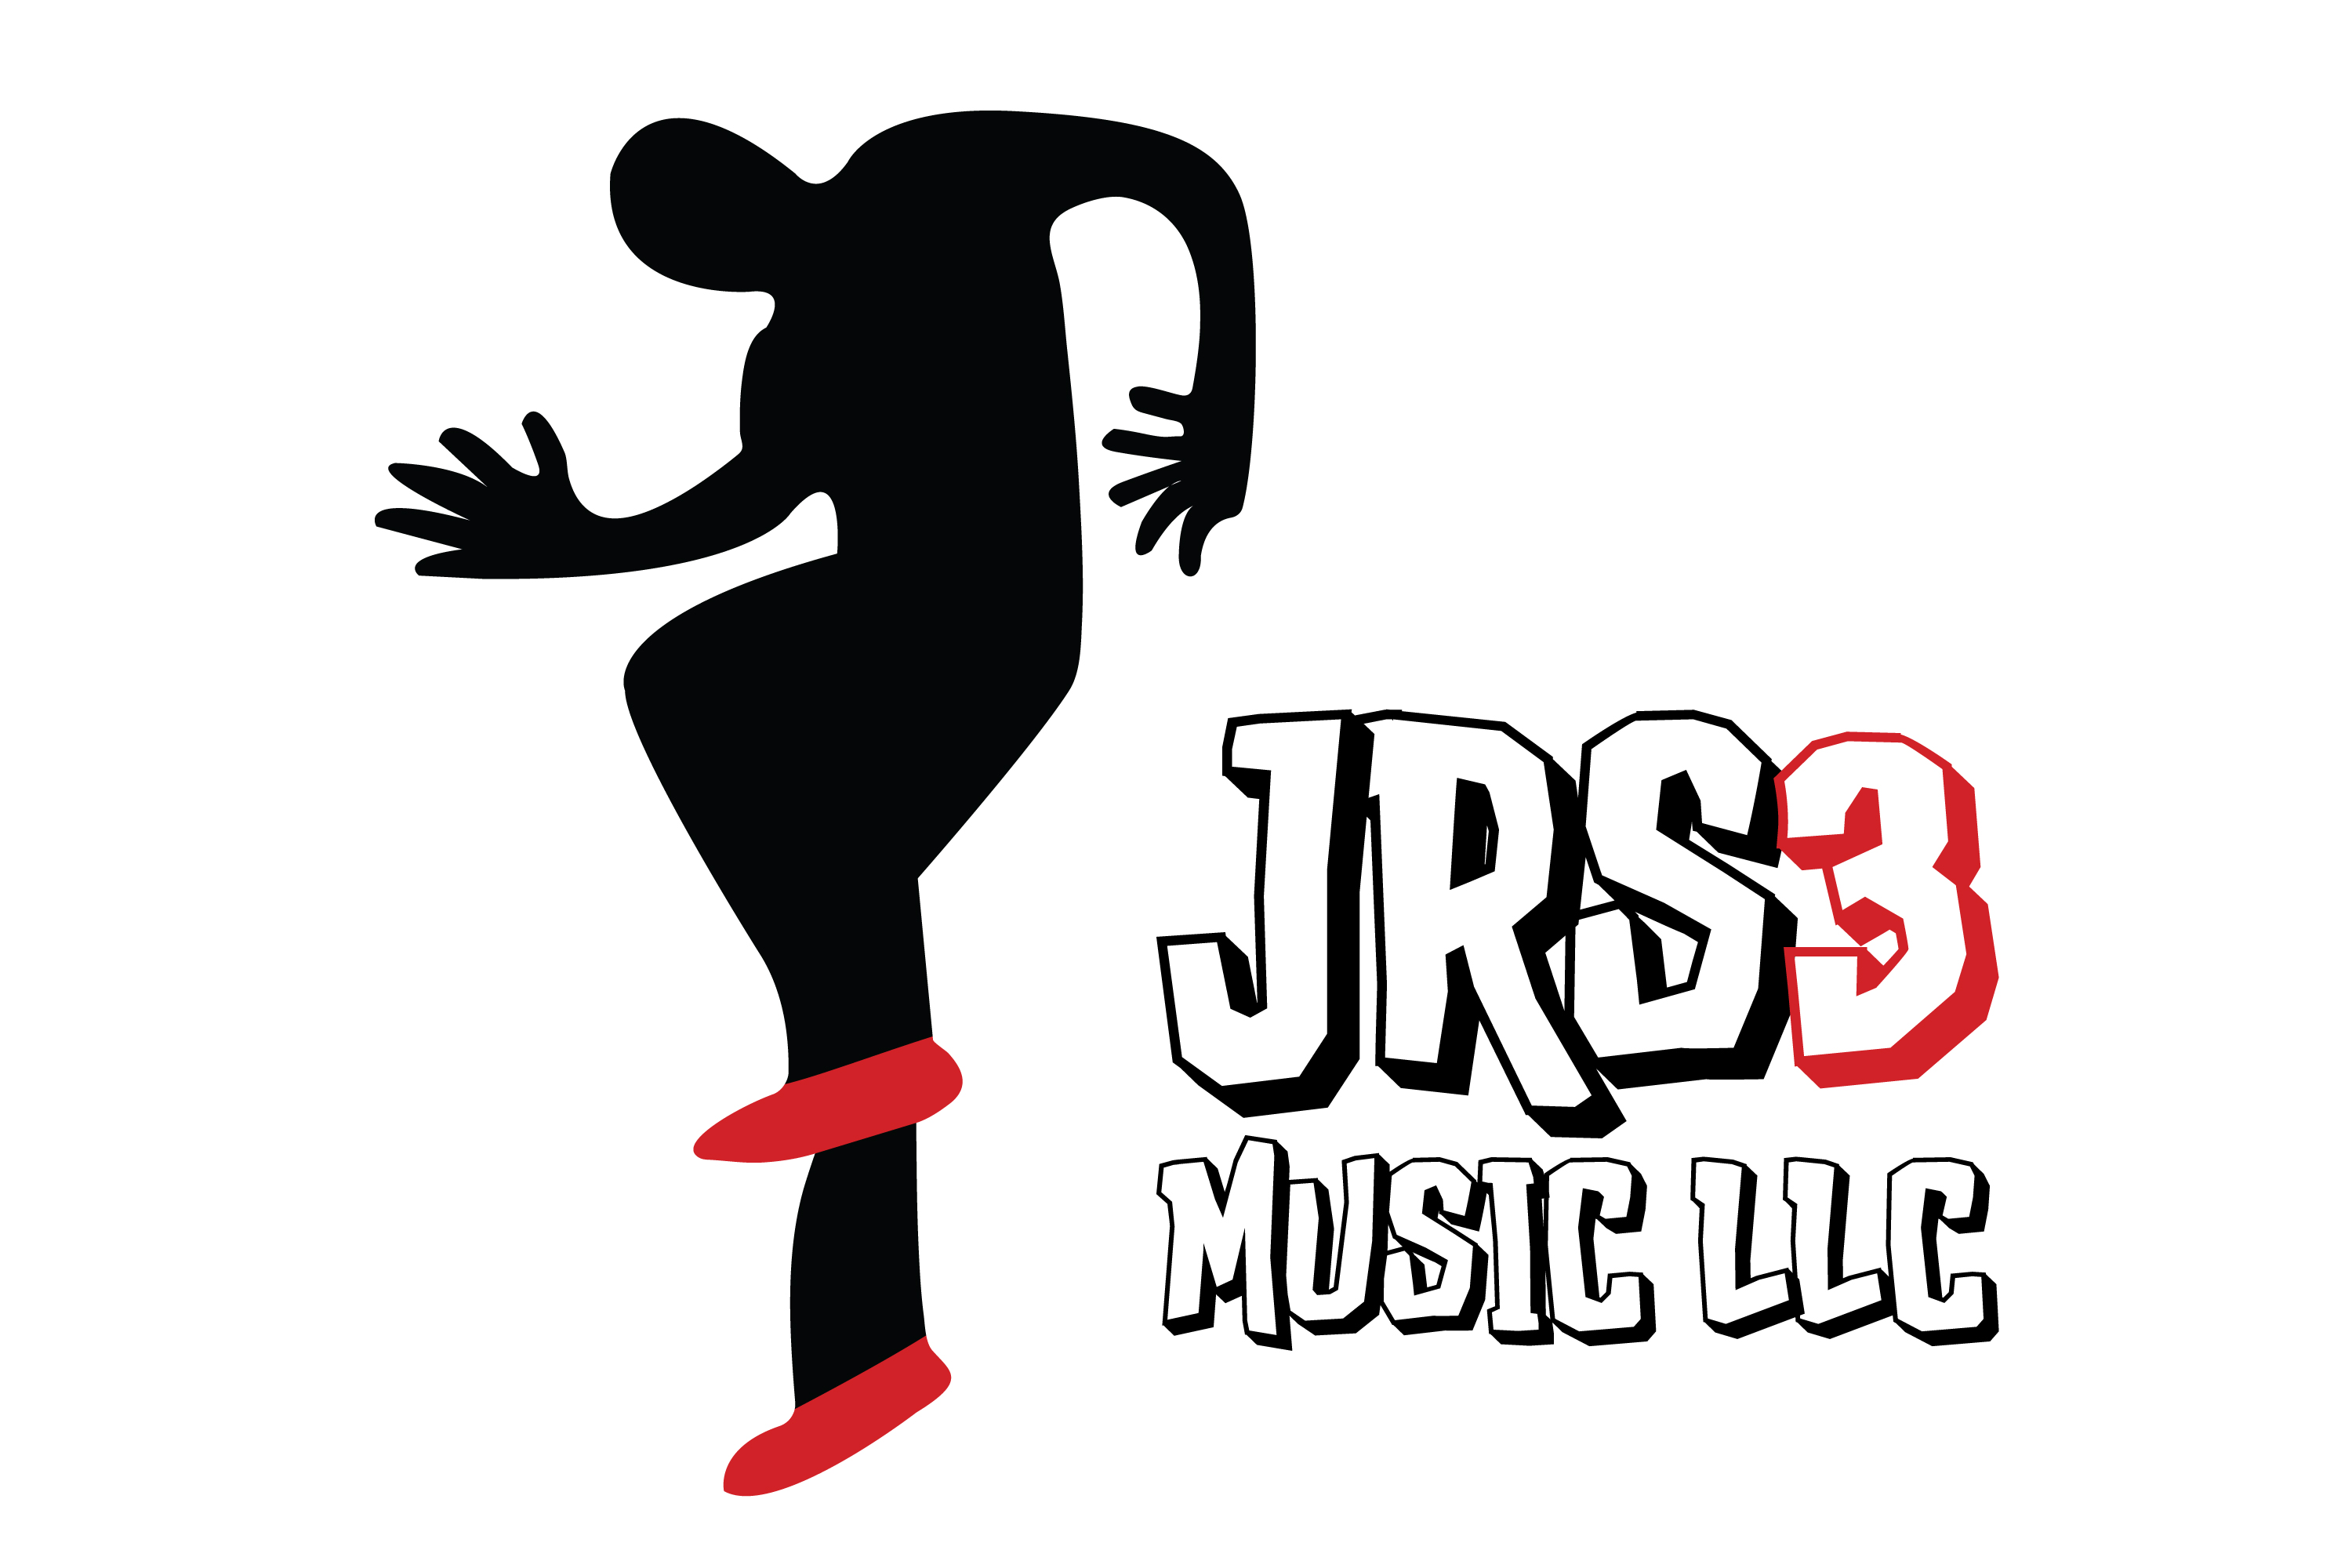 JRS3 Music Fashion Opens New Office Location, Affirms Dedication to Providing Top-Notch Hip-Hop and Punk-themed Clothing for Men and Women